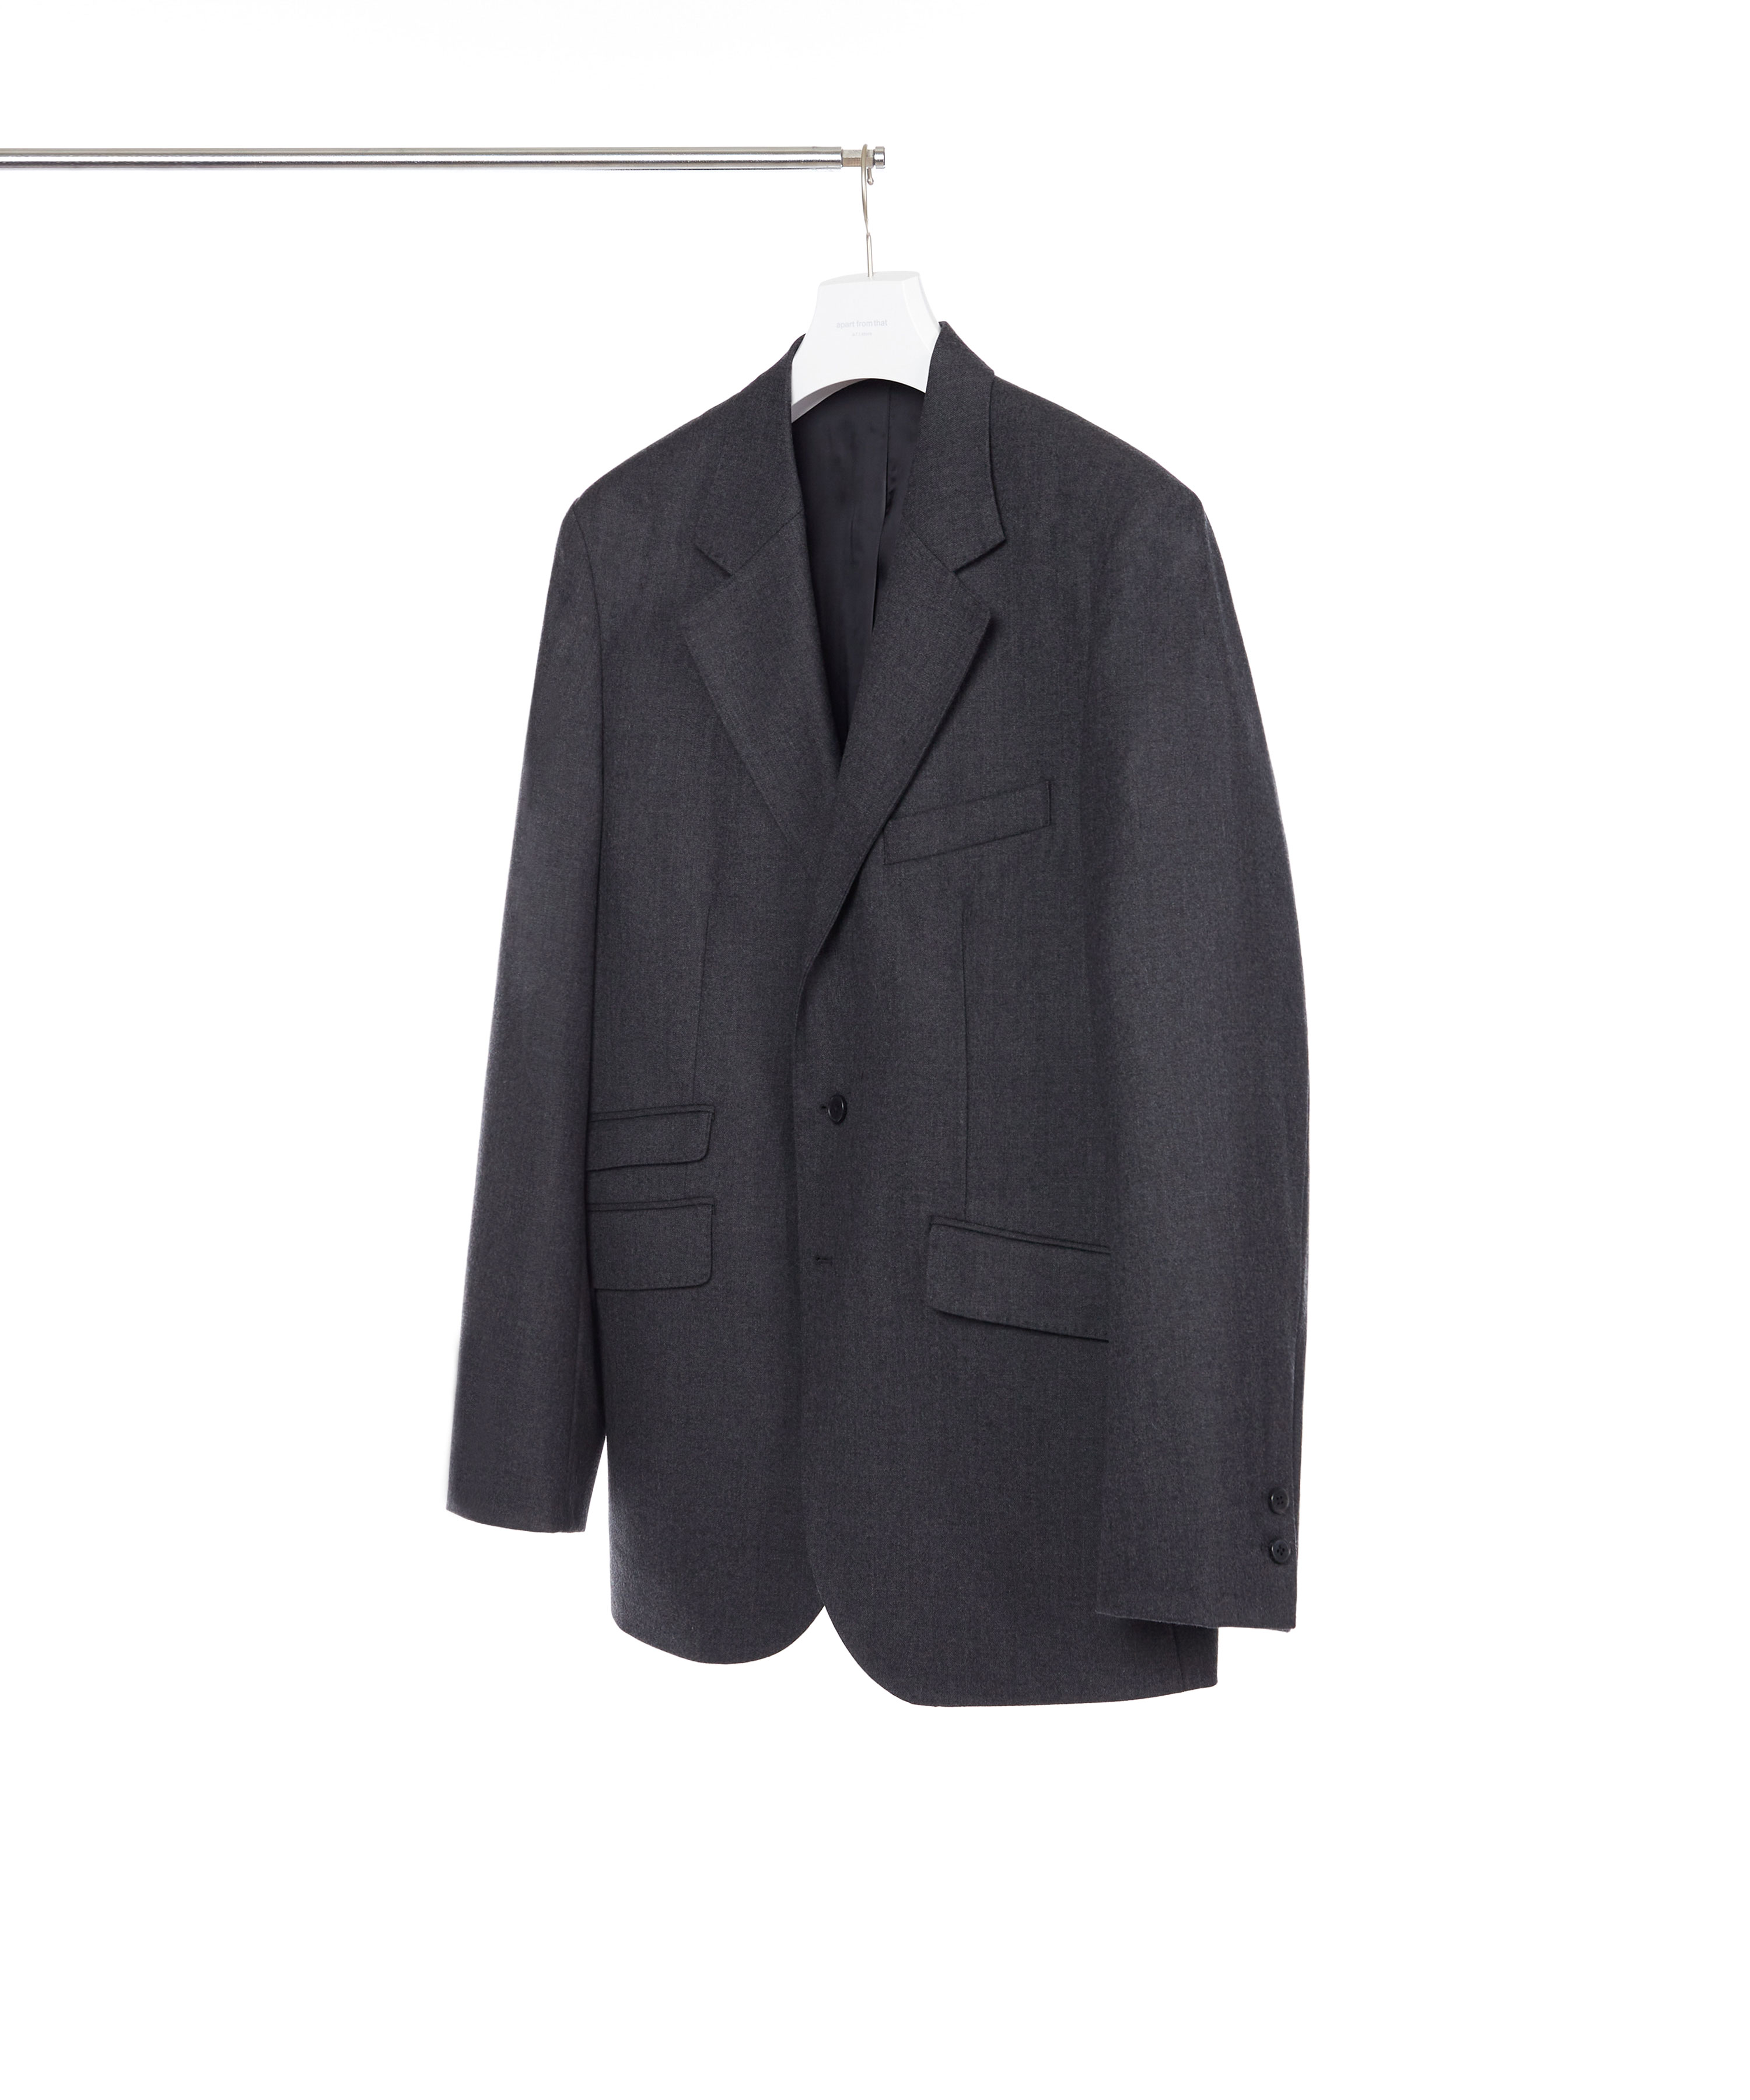 SUPER 160S HIGHLAND WOOL FLANNEL CHARCOAL 3ROLL 2BUTTON TAILORED BLAZER SINGLE 01-2